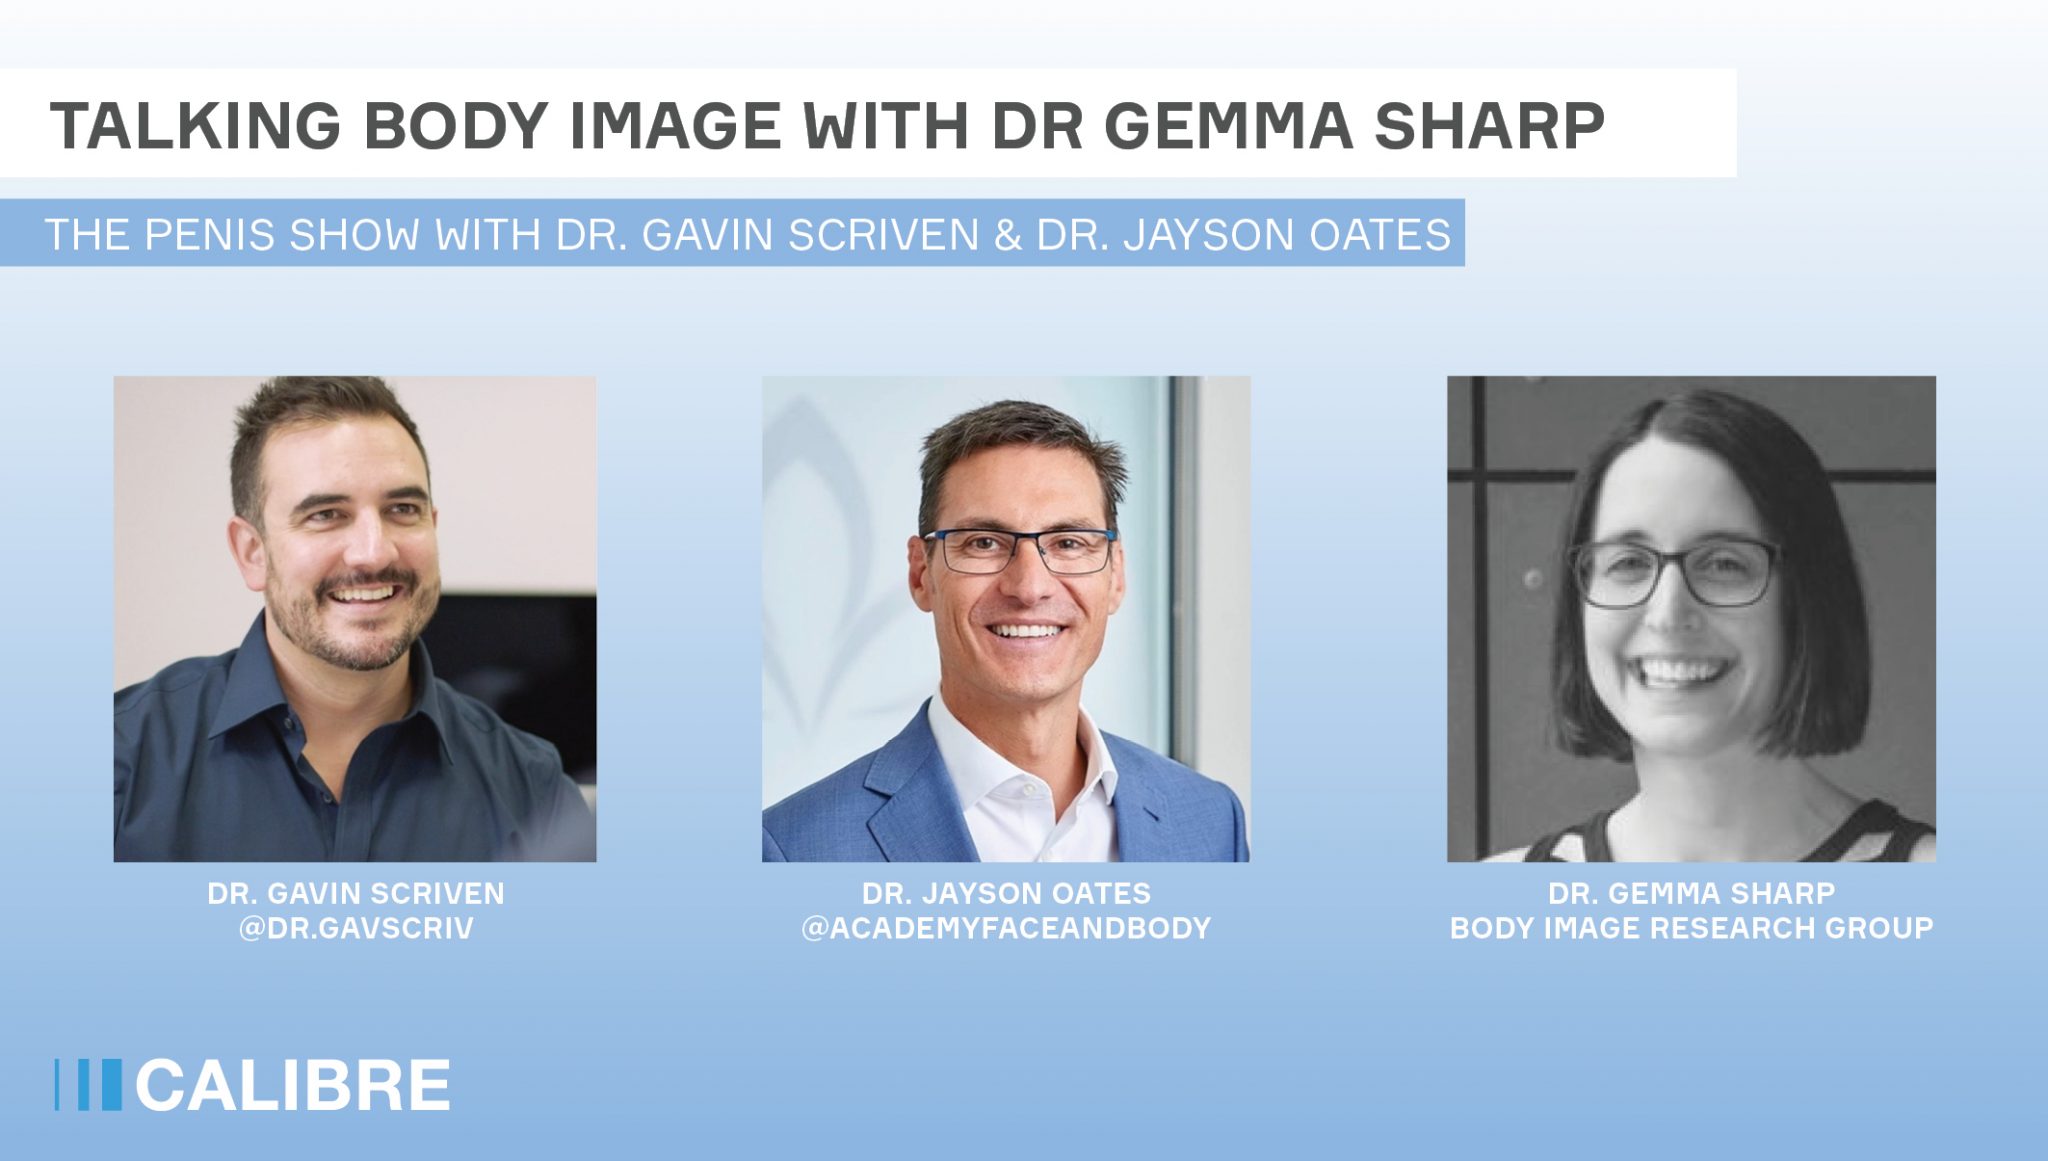 Talking body image with Dr. Gemma Sharp